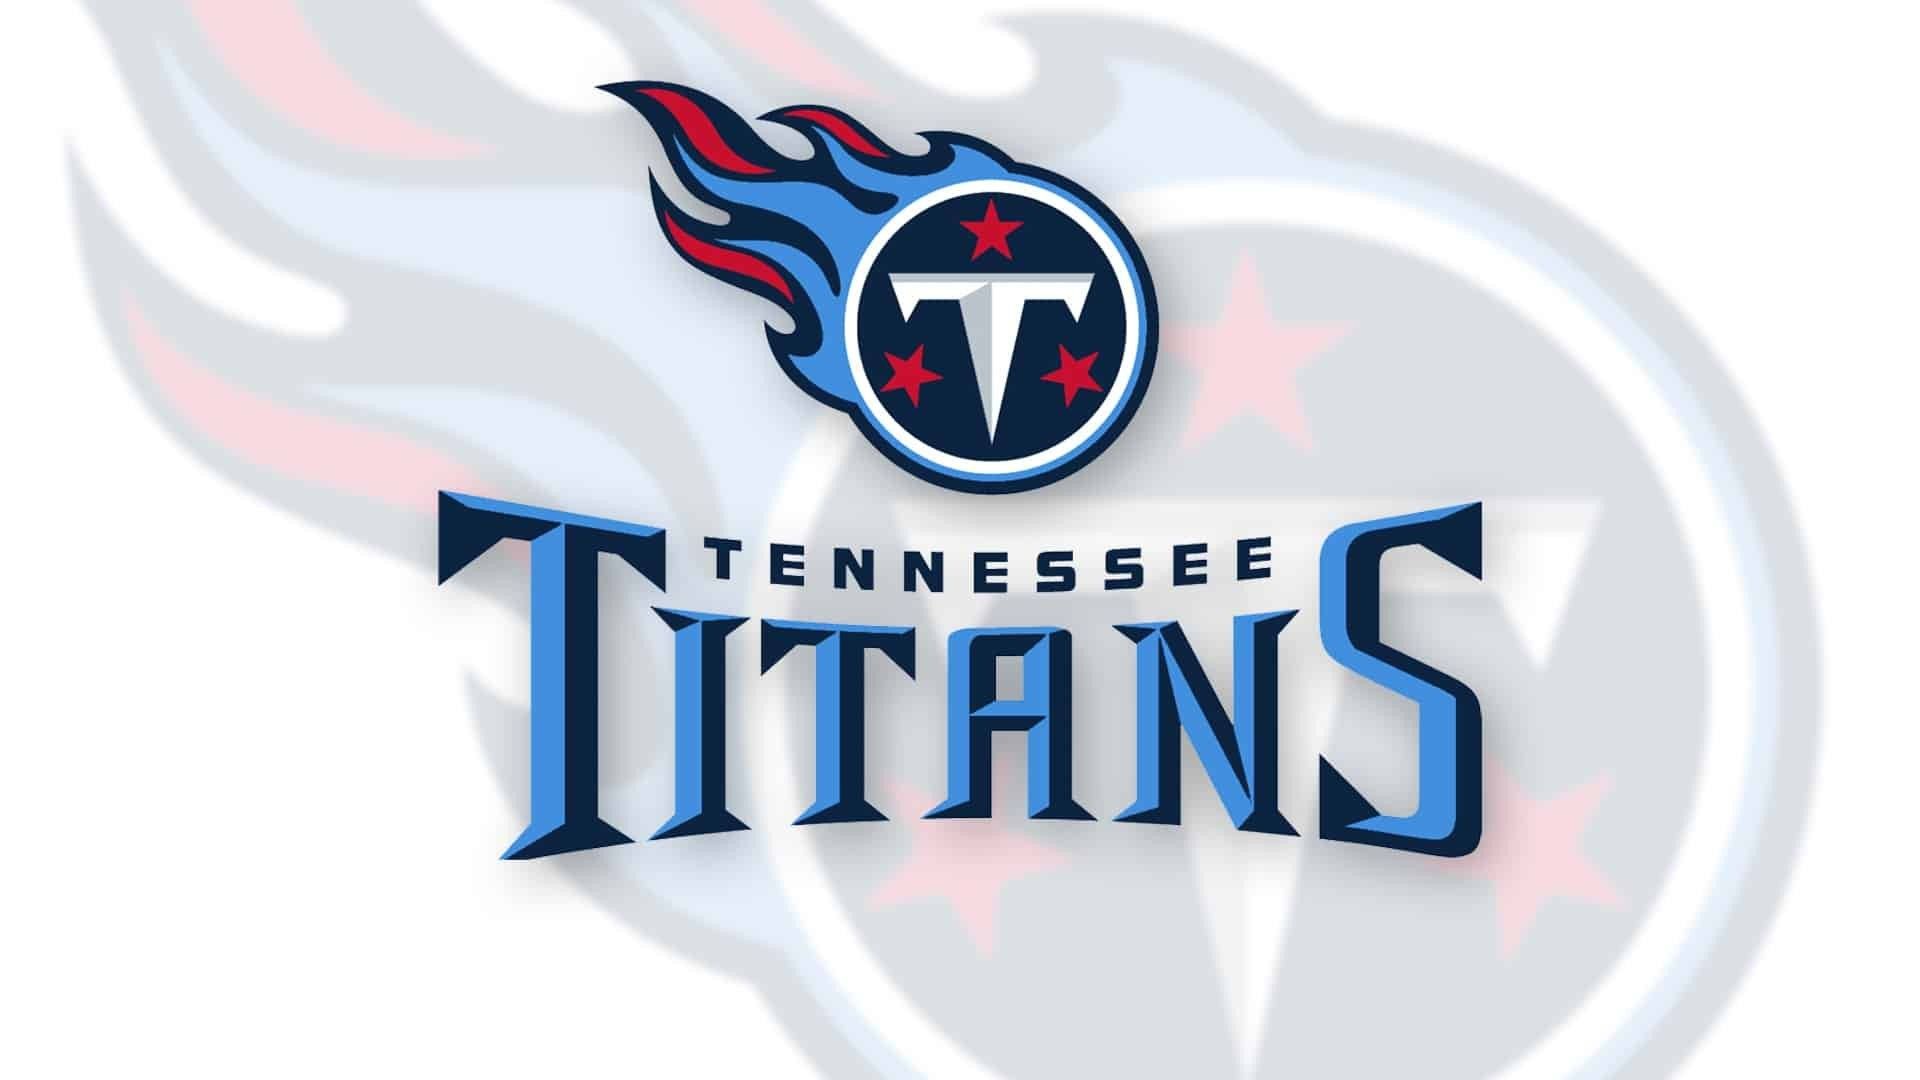 Tennessee Titans NFL Background Wallpaper 85953